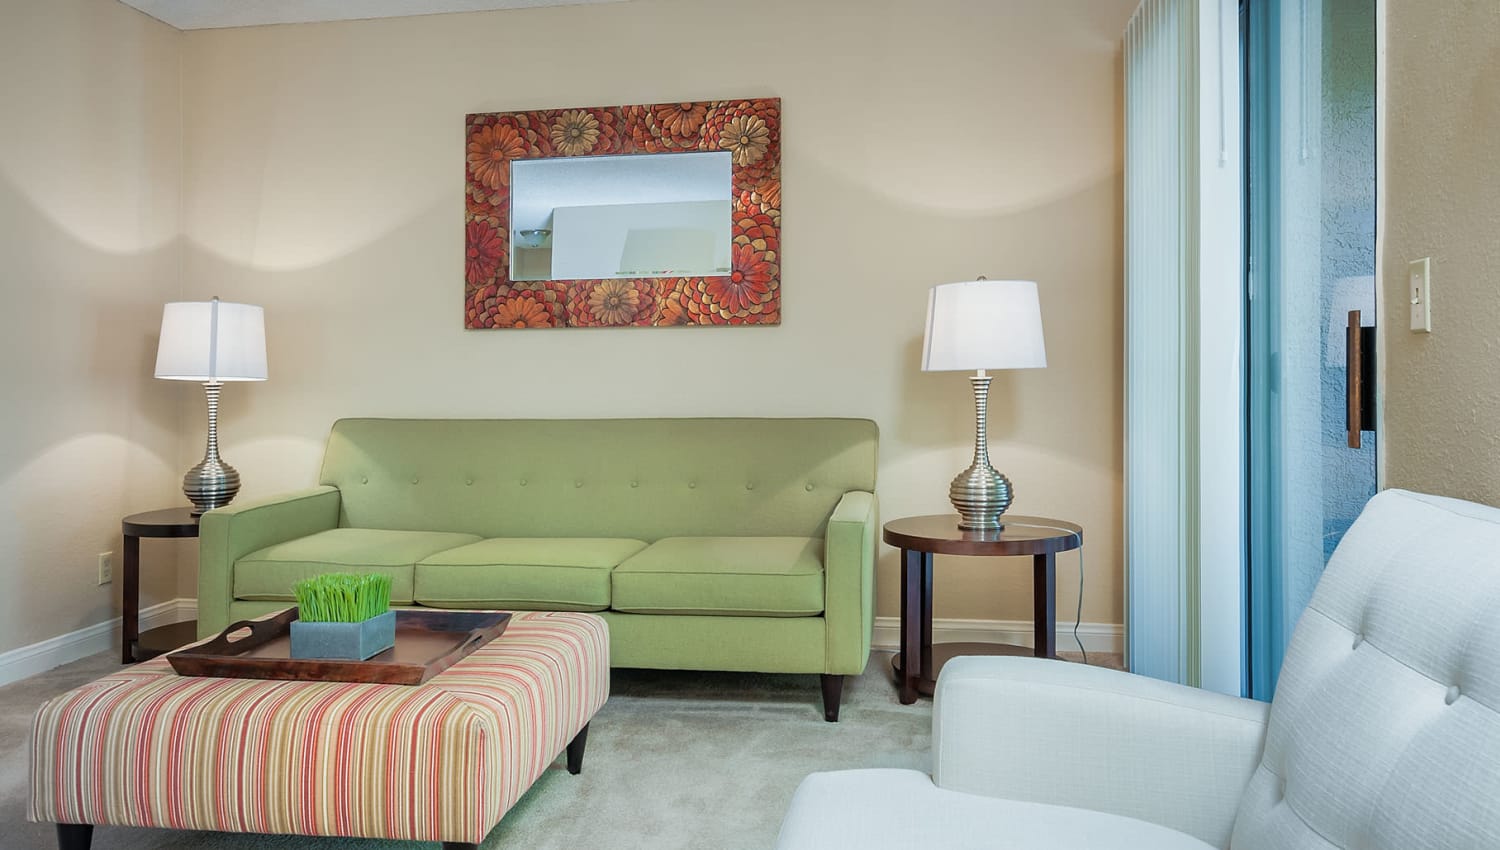 Modern furnishings in a model apartment's living area at Shelter Cove Apartments in Las Vegas, Nevada